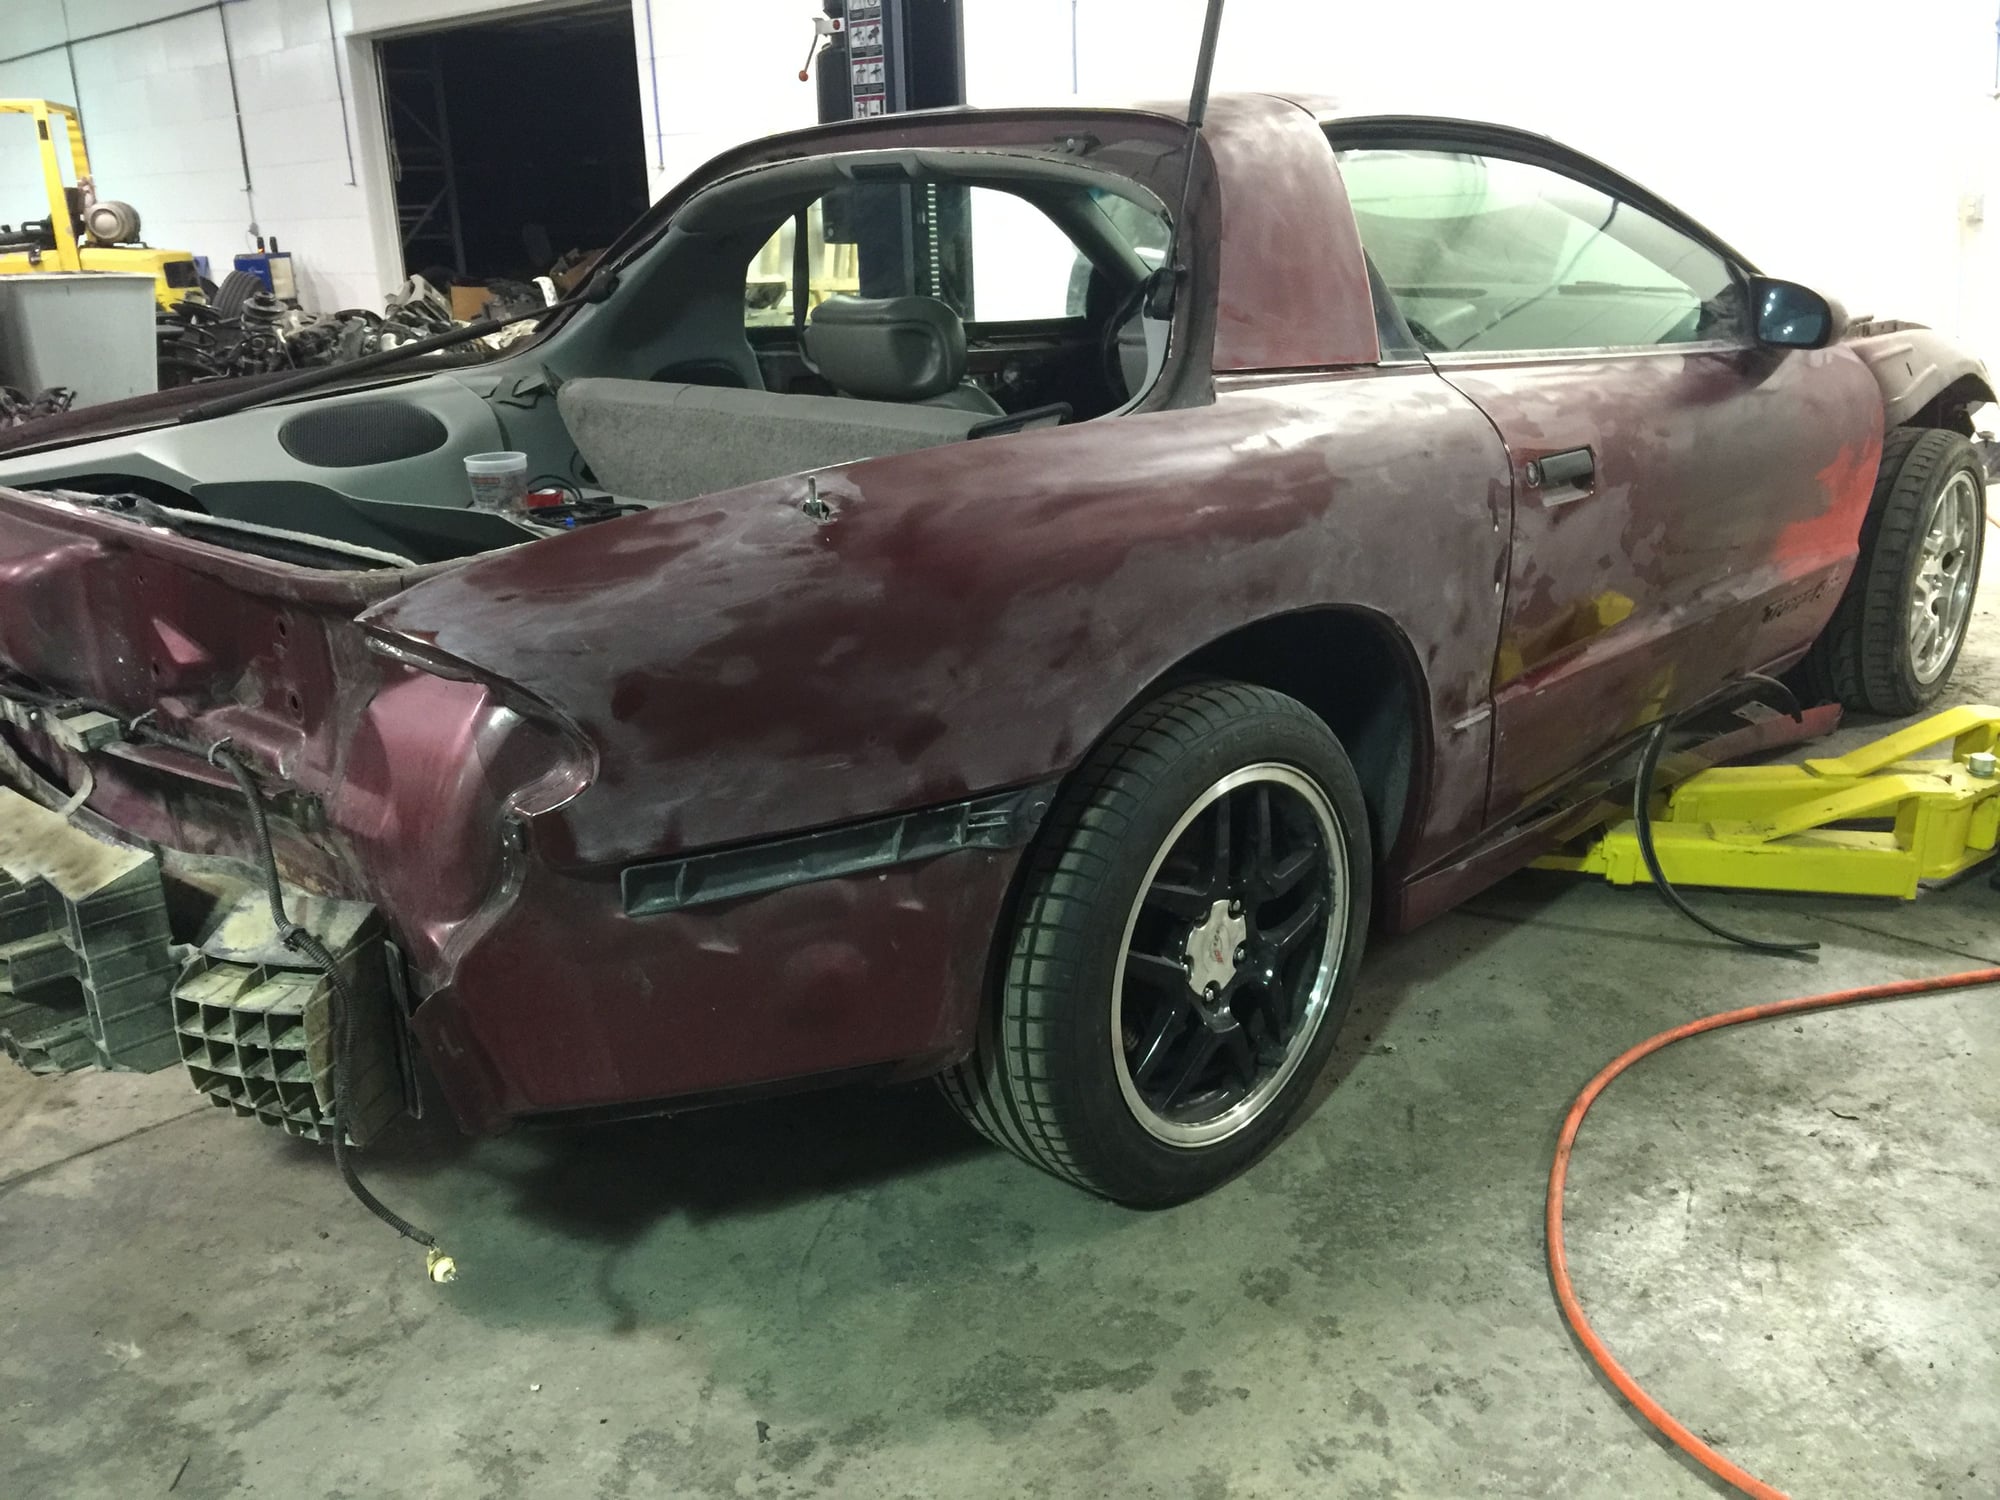 Trans am Carpet Dye with Dupli Color Vinyl carpet paint Gloss Black Before  and After - LS1TECH - Camaro and Firebird Forum Discussion